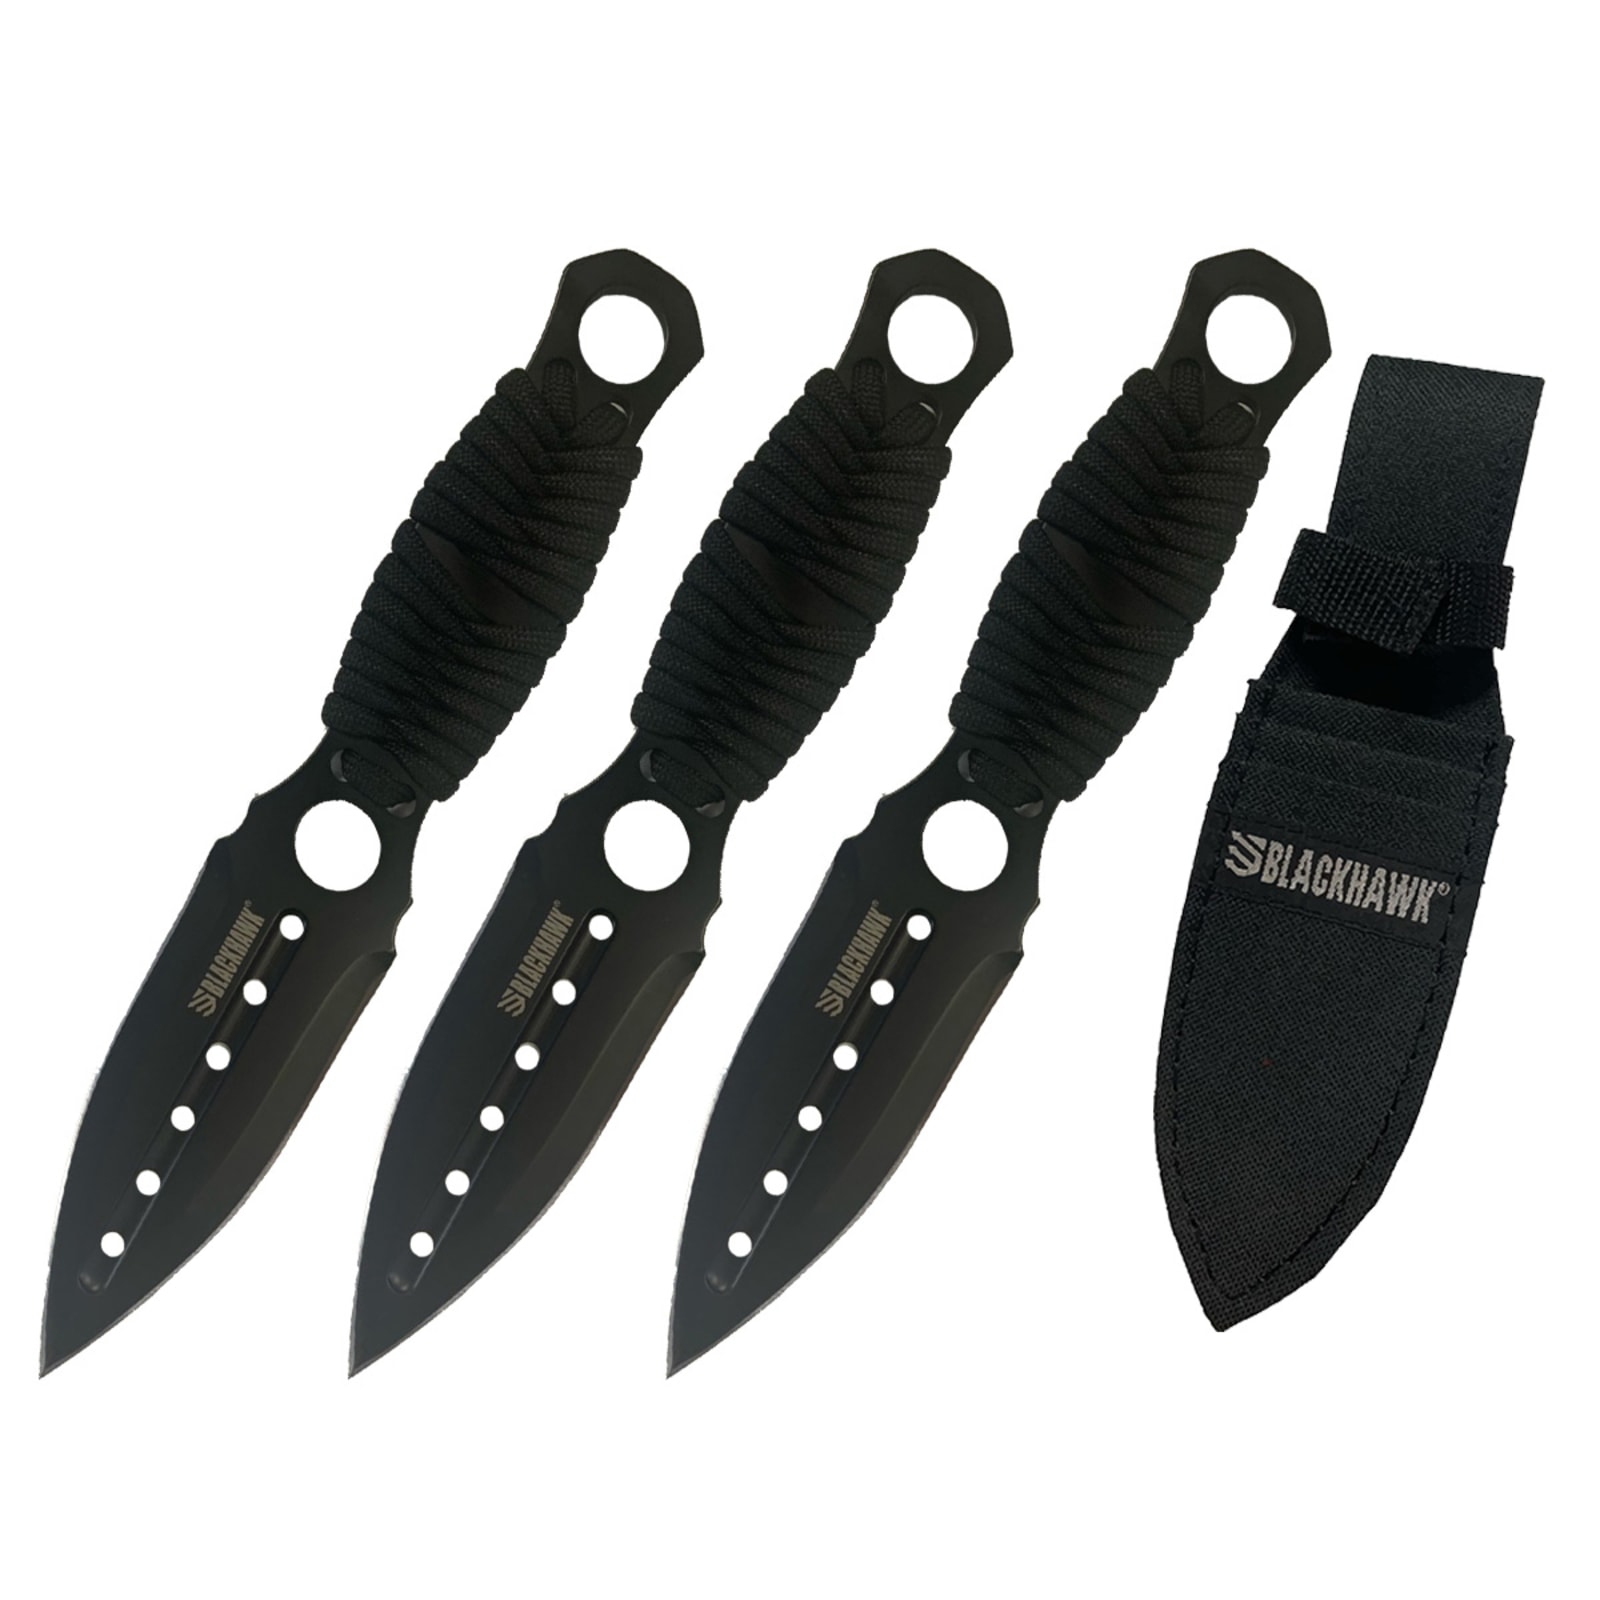 8 Three Piece Hunt Down Black Throwing Knife Set With Fish Hook